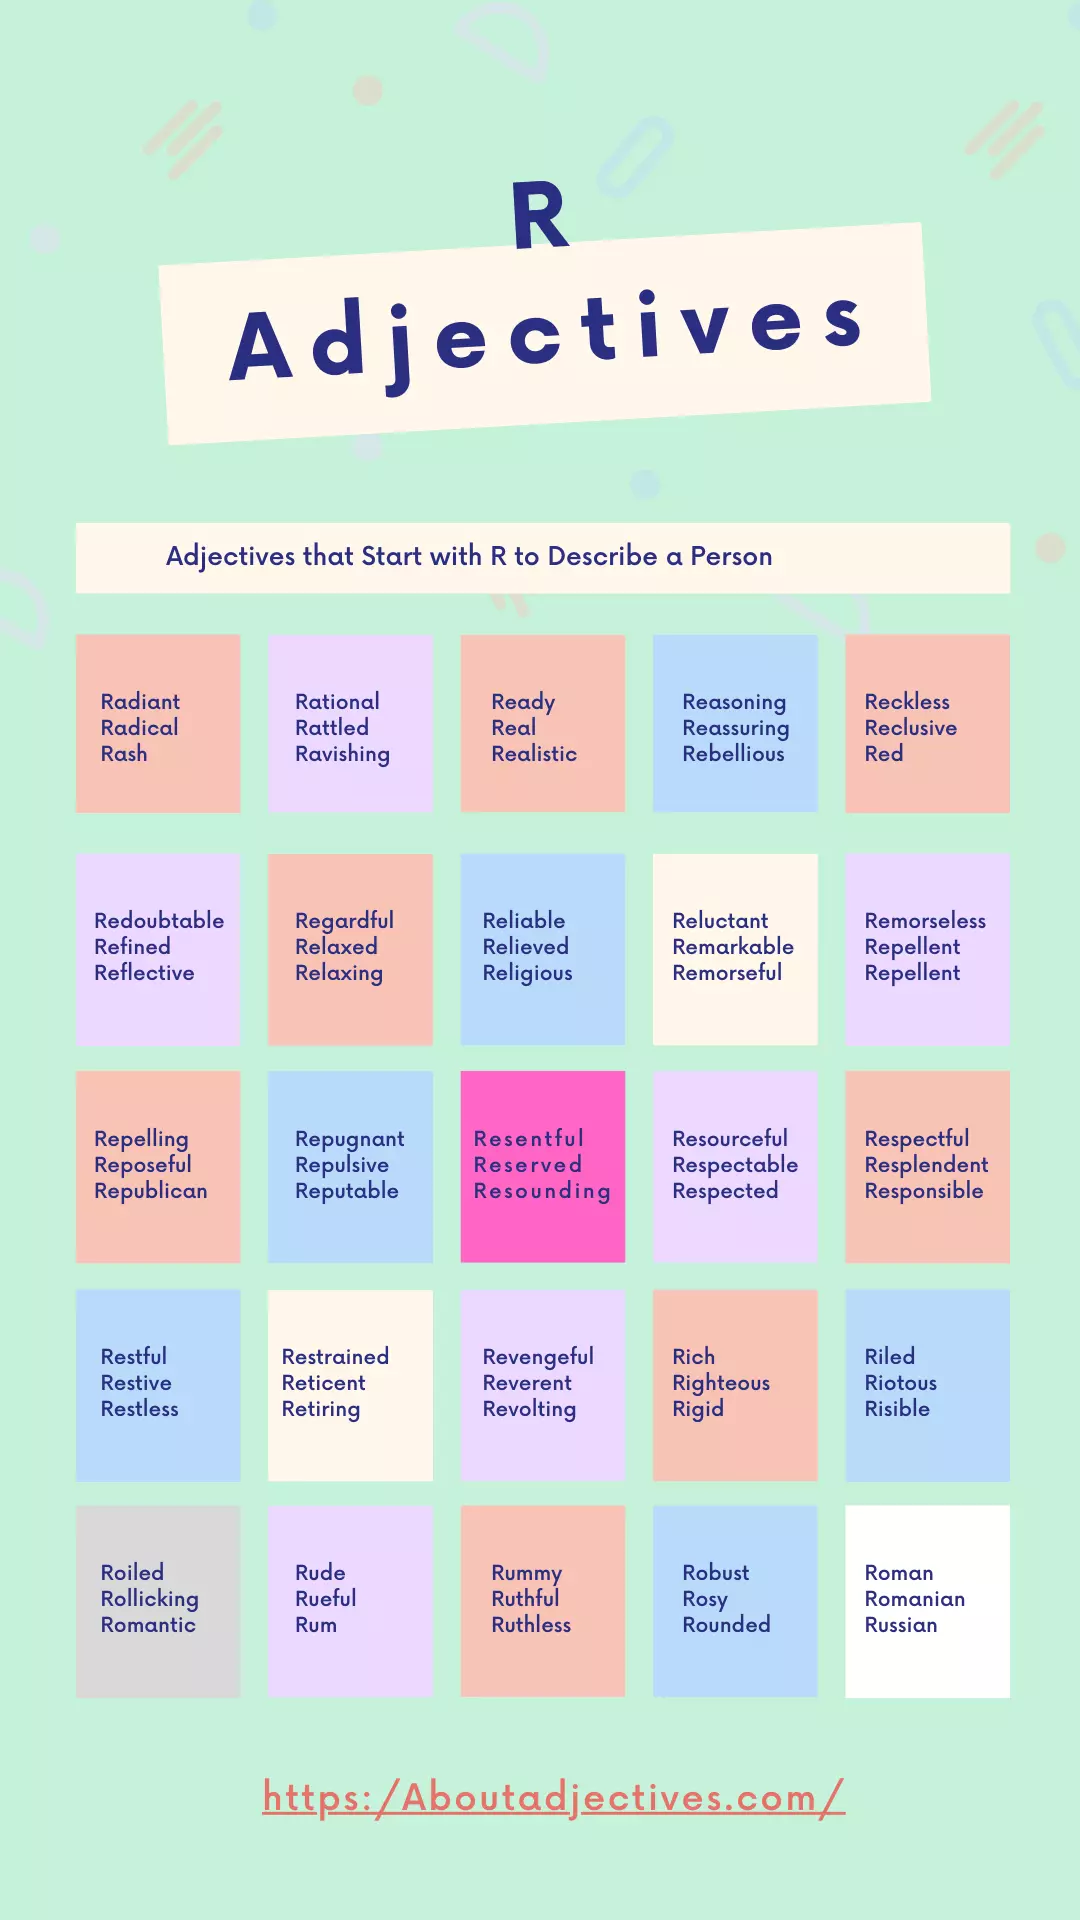 Adjectives that Start with R to describe about a Person